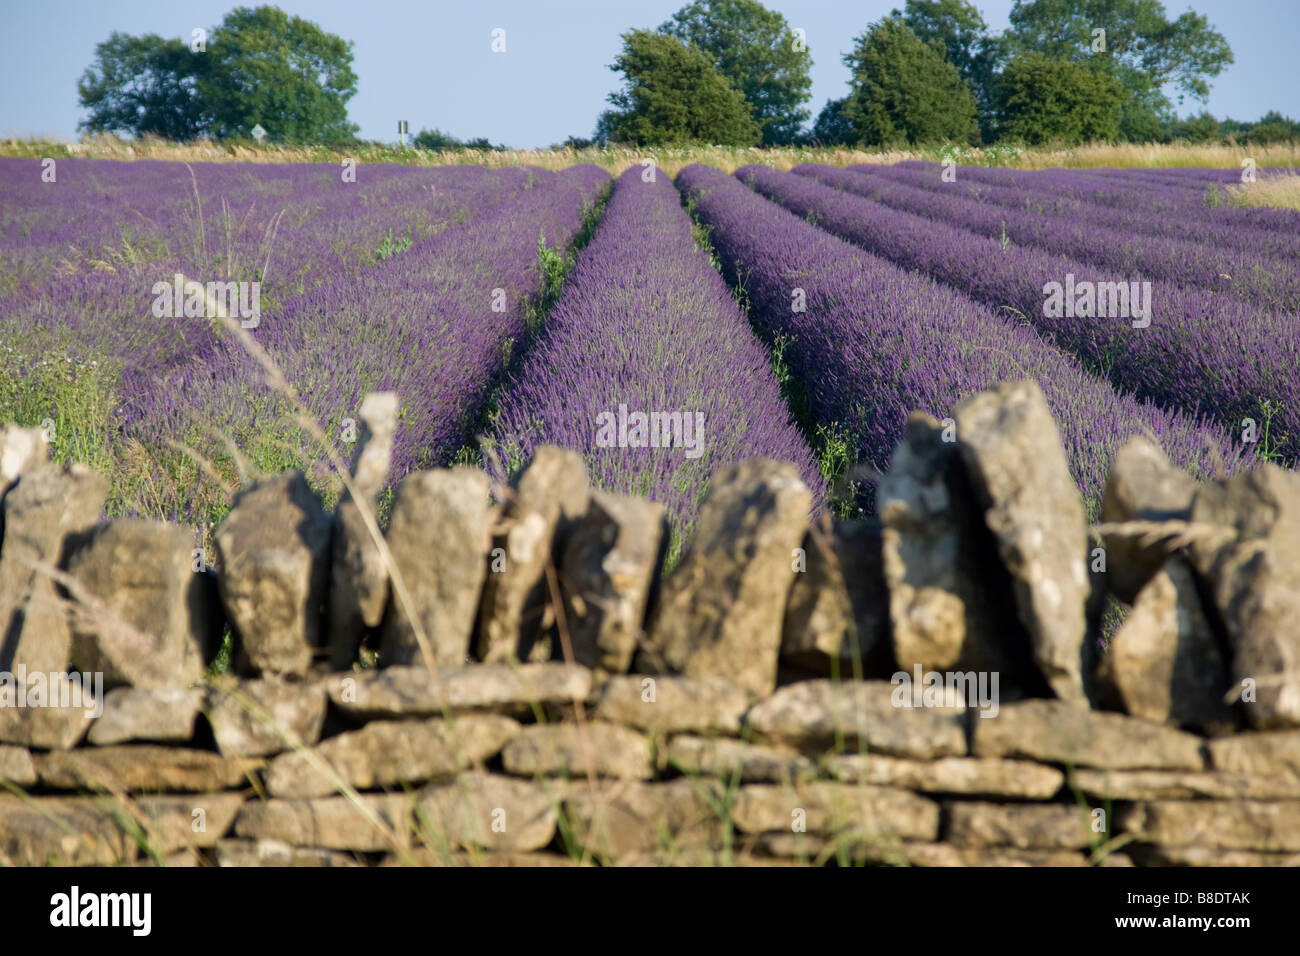 A field of lavender, in flower - traditional Cotswold dry-stone wall in foreground Stock Photo